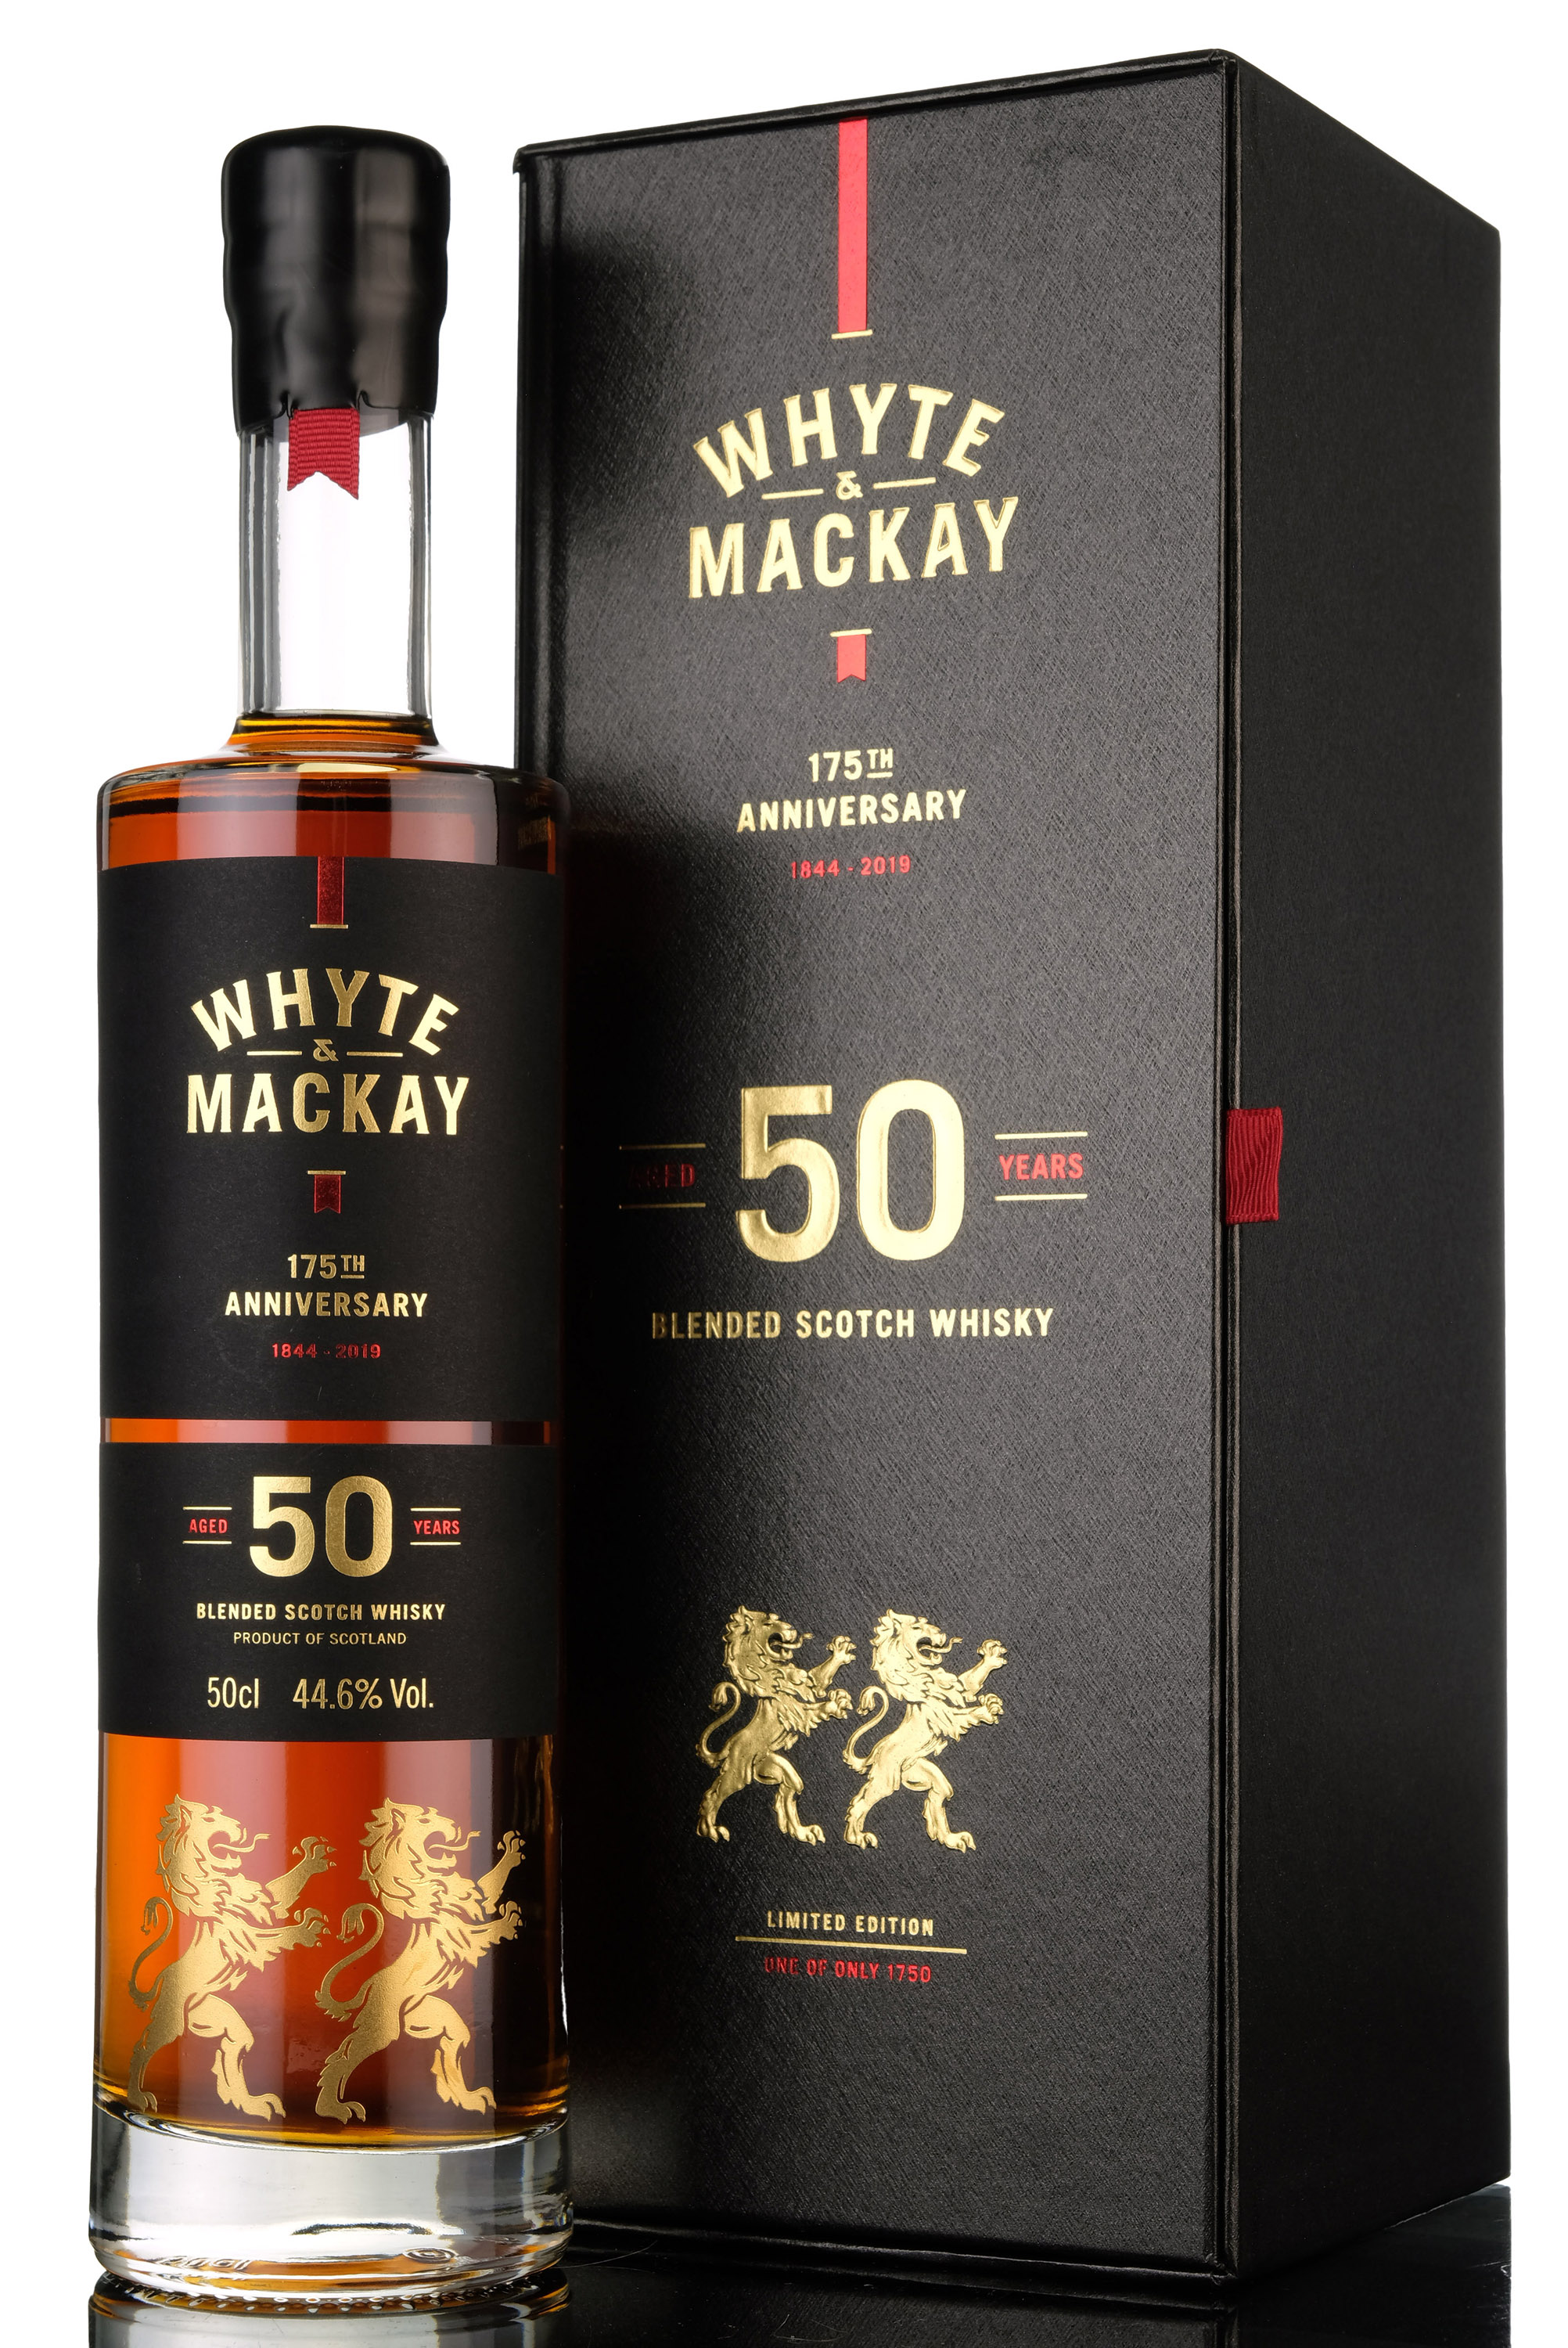 Whyte & MacKay 50 Year Old - 175th Anniversary 1844-2019